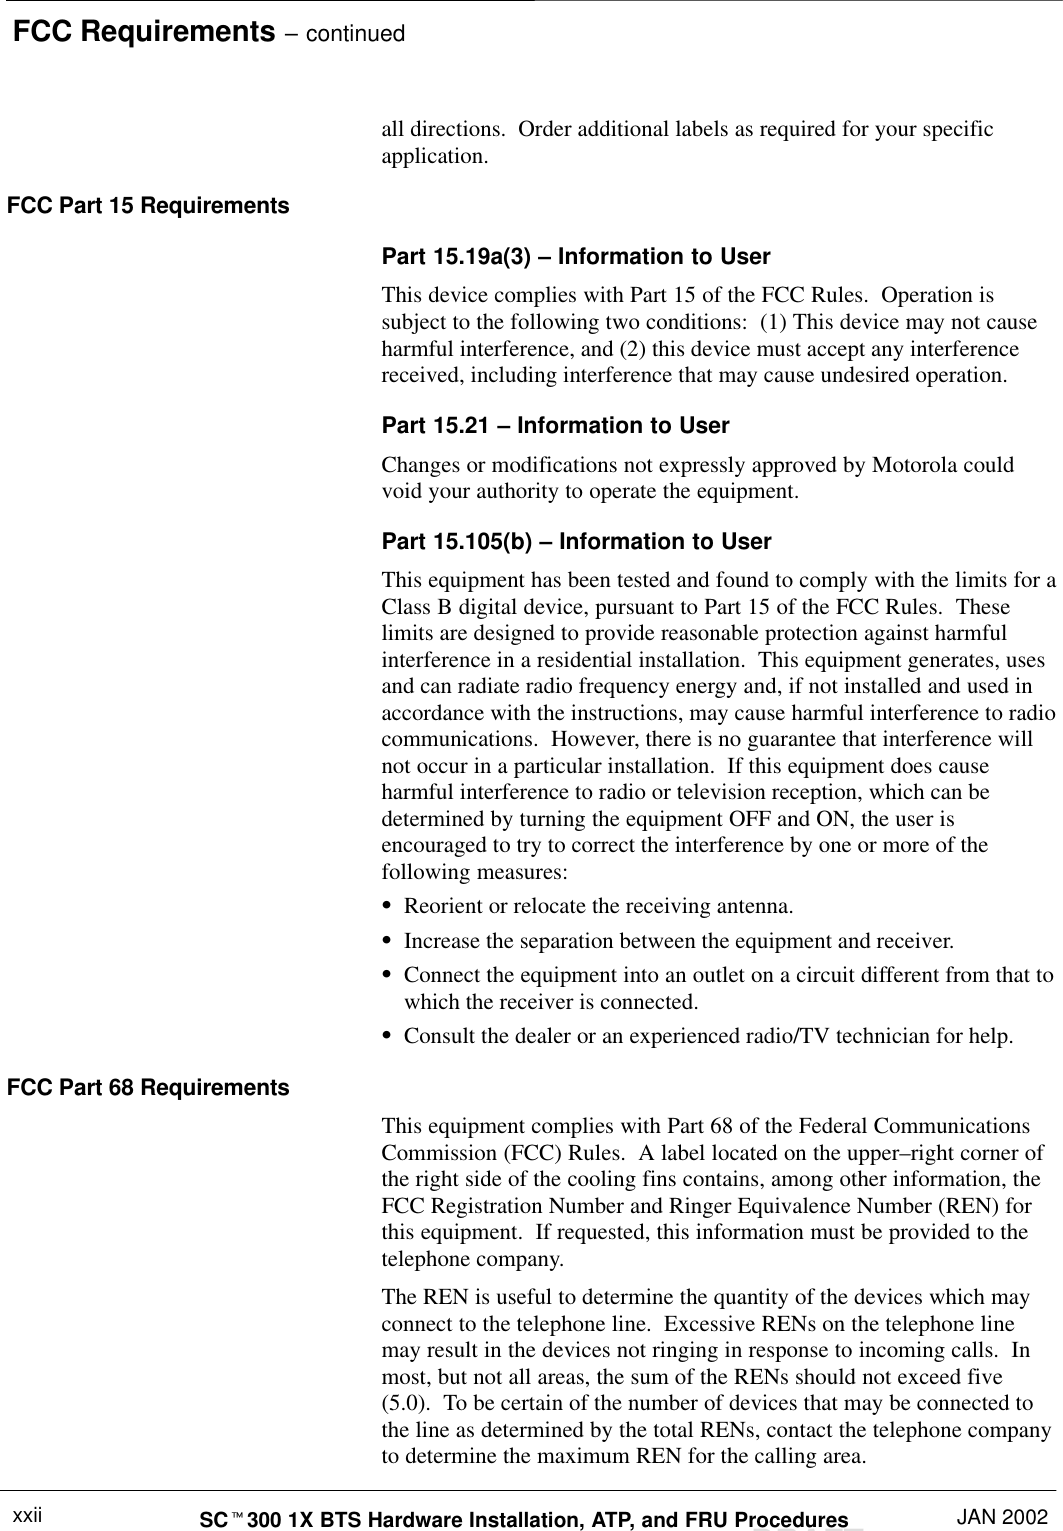 FCC Requirements – continuedDRAFTSCt300 1X BTS Hardware Installation, ATP, and FRU Procedures JAN 2002xxiiall directions.  Order additional labels as required for your specificapplication.FCC Part 15 RequirementsPart 15.19a(3) – Information to UserThis device complies with Part 15 of the FCC Rules.  Operation issubject to the following two conditions:  (1) This device may not causeharmful interference, and (2) this device must accept any interferencereceived, including interference that may cause undesired operation.Part 15.21 – Information to UserChanges or modifications not expressly approved by Motorola couldvoid your authority to operate the equipment.Part 15.105(b) – Information to UserThis equipment has been tested and found to comply with the limits for aClass B digital device, pursuant to Part 15 of the FCC Rules.  Theselimits are designed to provide reasonable protection against harmfulinterference in a residential installation.  This equipment generates, usesand can radiate radio frequency energy and, if not installed and used inaccordance with the instructions, may cause harmful interference to radiocommunications.  However, there is no guarantee that interference willnot occur in a particular installation.  If this equipment does causeharmful interference to radio or television reception, which can bedetermined by turning the equipment OFF and ON, the user isencouraged to try to correct the interference by one or more of thefollowing measures:SReorient or relocate the receiving antenna.SIncrease the separation between the equipment and receiver.SConnect the equipment into an outlet on a circuit different from that towhich the receiver is connected.SConsult the dealer or an experienced radio/TV technician for help.FCC Part 68 RequirementsThis equipment complies with Part 68 of the Federal CommunicationsCommission (FCC) Rules.  A label located on the upper–right corner ofthe right side of the cooling fins contains, among other information, theFCC Registration Number and Ringer Equivalence Number (REN) forthis equipment.  If requested, this information must be provided to thetelephone company.The REN is useful to determine the quantity of the devices which mayconnect to the telephone line.  Excessive RENs on the telephone linemay result in the devices not ringing in response to incoming calls.  Inmost, but not all areas, the sum of the RENs should not exceed five(5.0).  To be certain of the number of devices that may be connected tothe line as determined by the total RENs, contact the telephone companyto determine the maximum REN for the calling area.